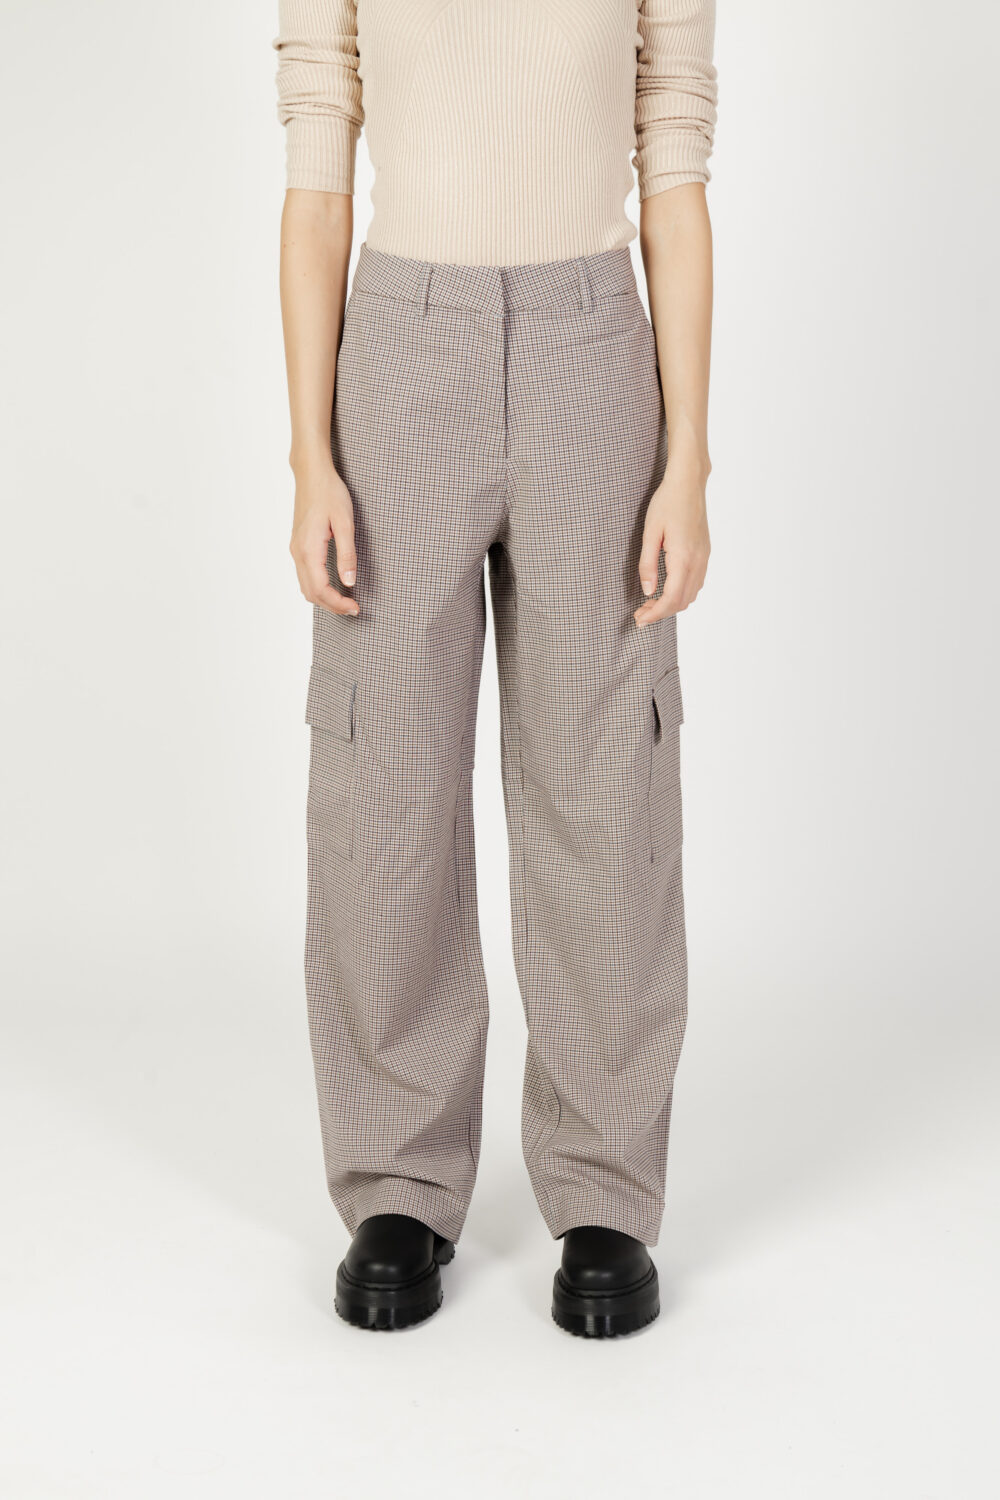 Pantaloni a sigaretta Only onljoss hw straight cargo check pant tlr Beige chiaro - Foto 6